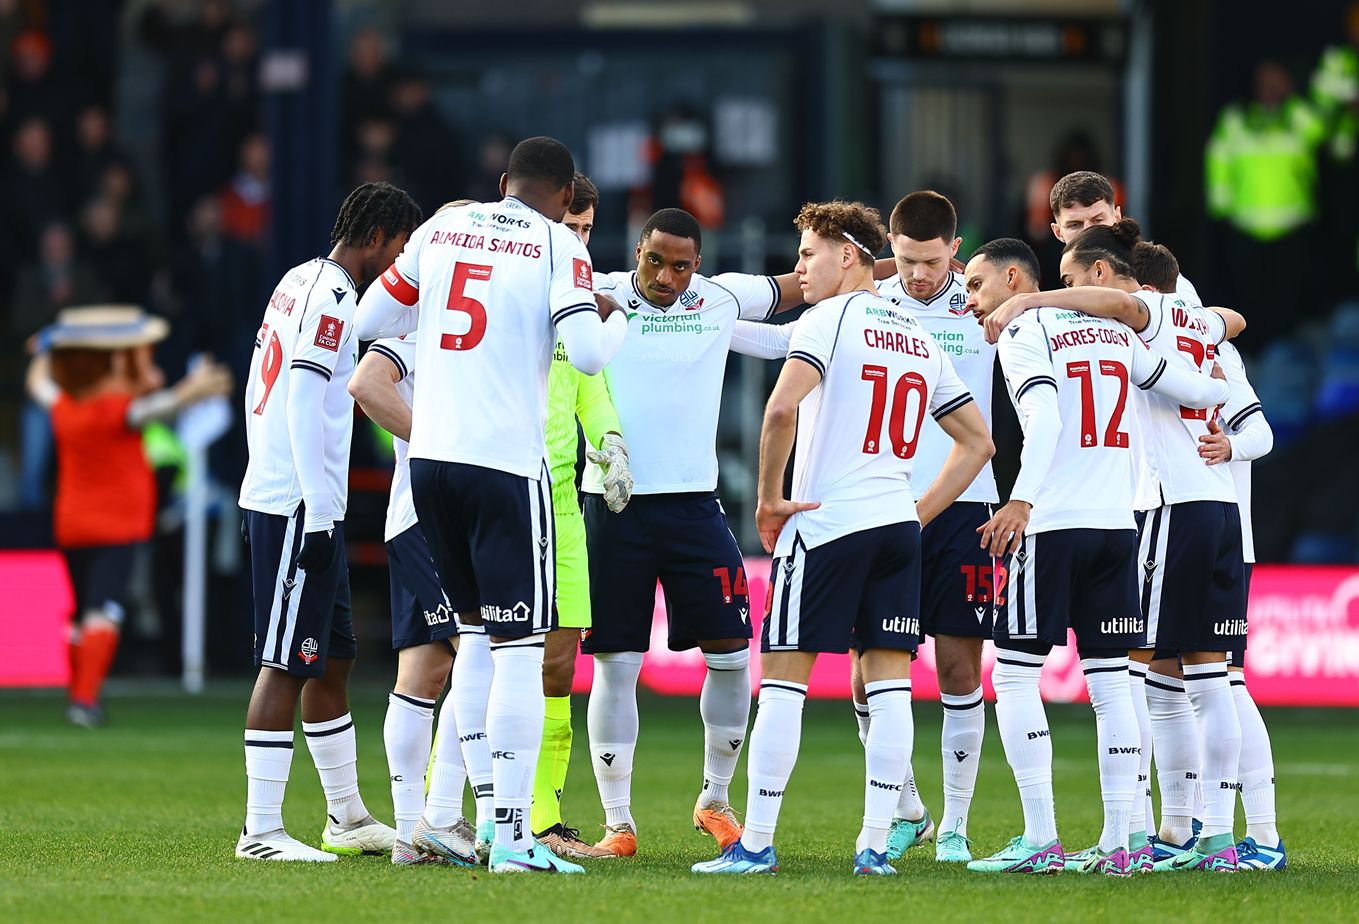 Bolton Wanderers players in a pre-match huddle before our game at Kenilworth Road.